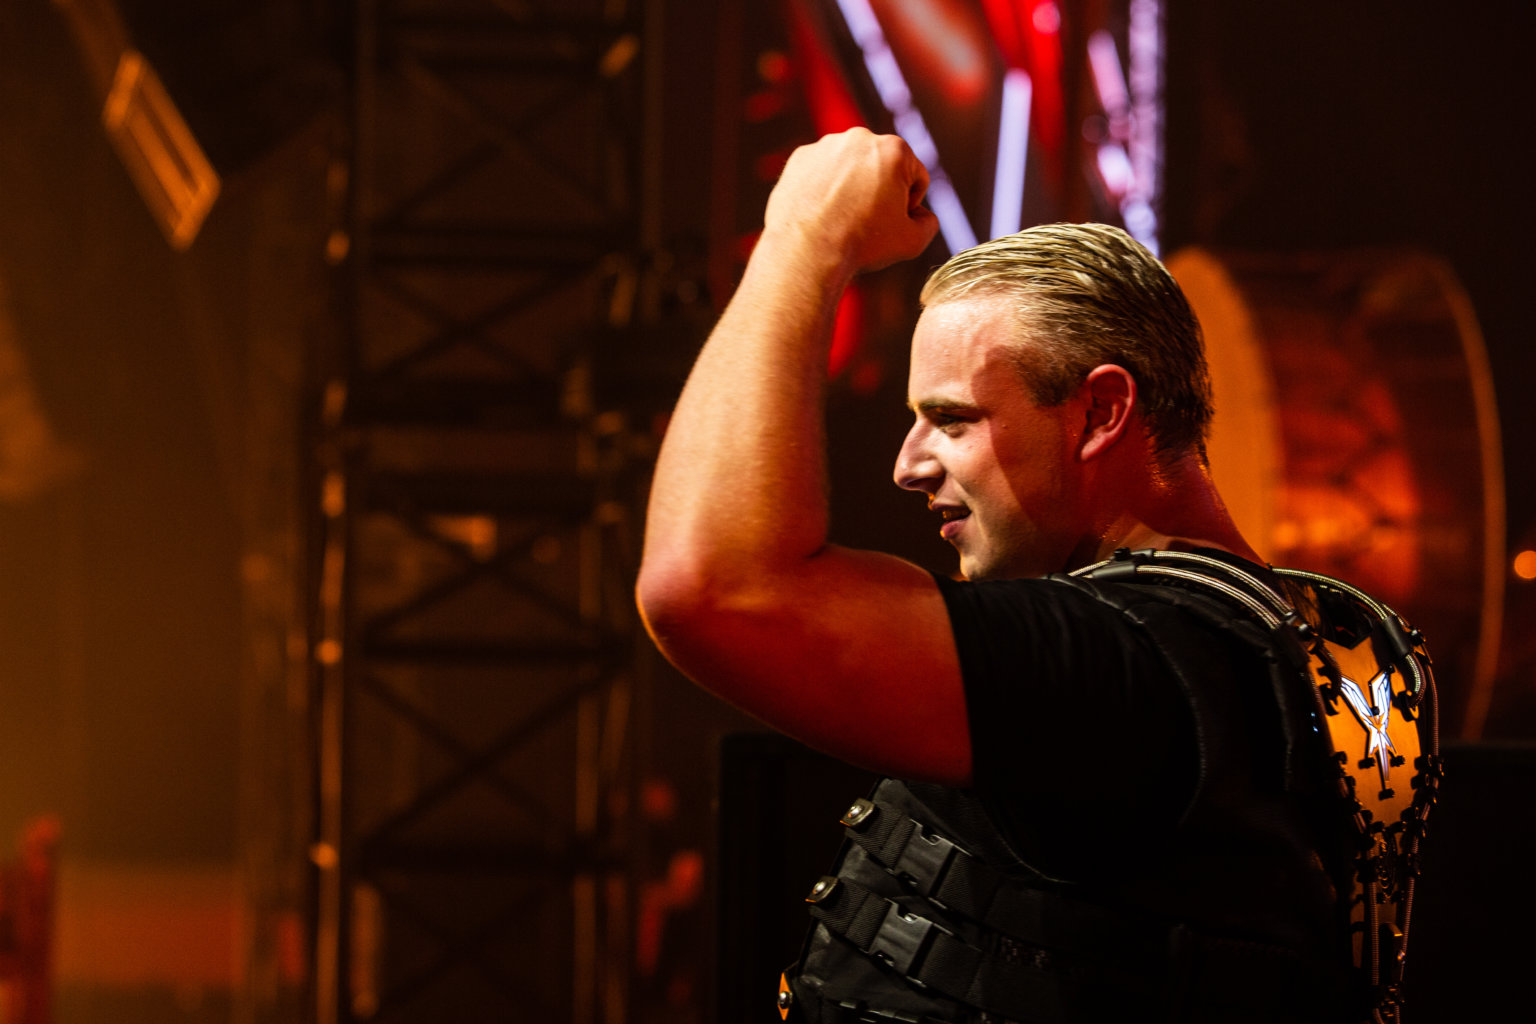 This is the official anthem of Radical Redemption – Brotherhood of Brutality